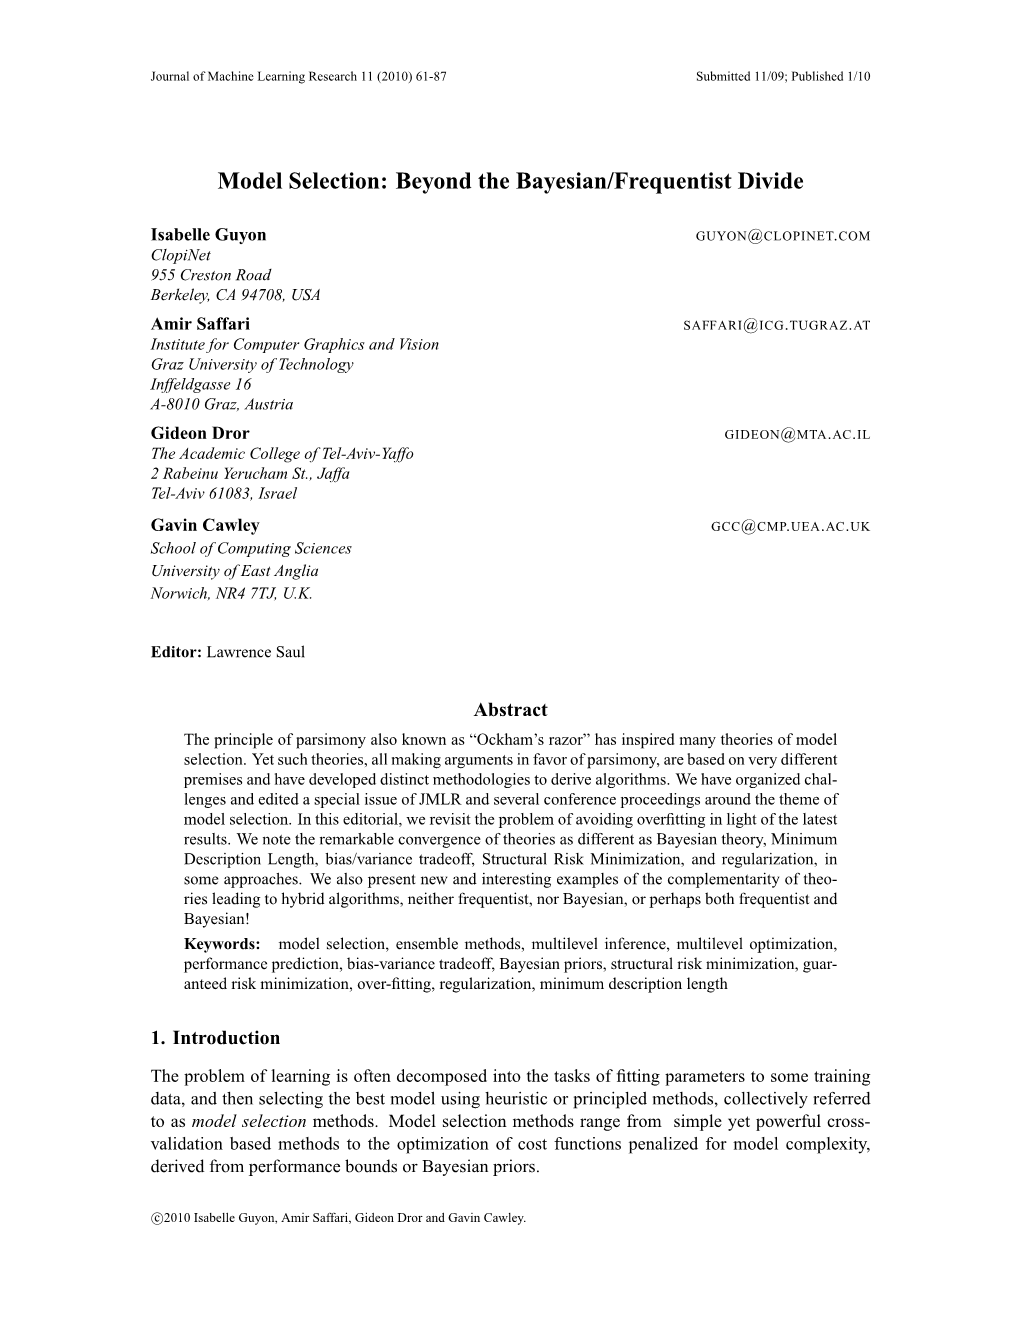 Model Selection: Beyond the Bayesian/Frequentist Divide